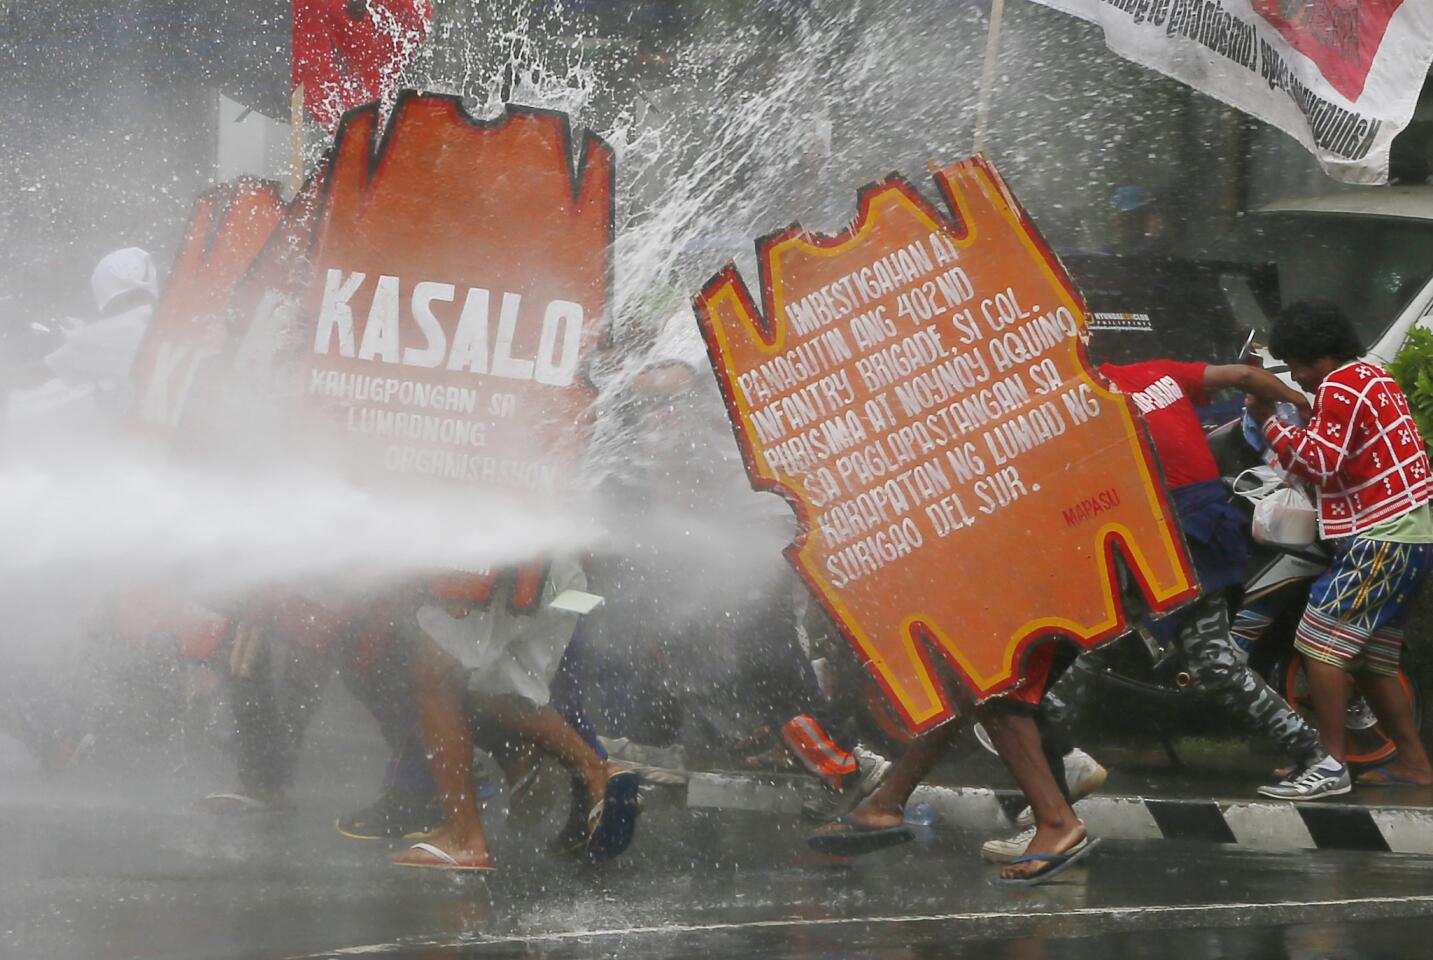 A firefighter aims his hose at surging protesters as they force their way toward the U.S. Embassy in Manila, Philippines, on Oct. 19, 2016.